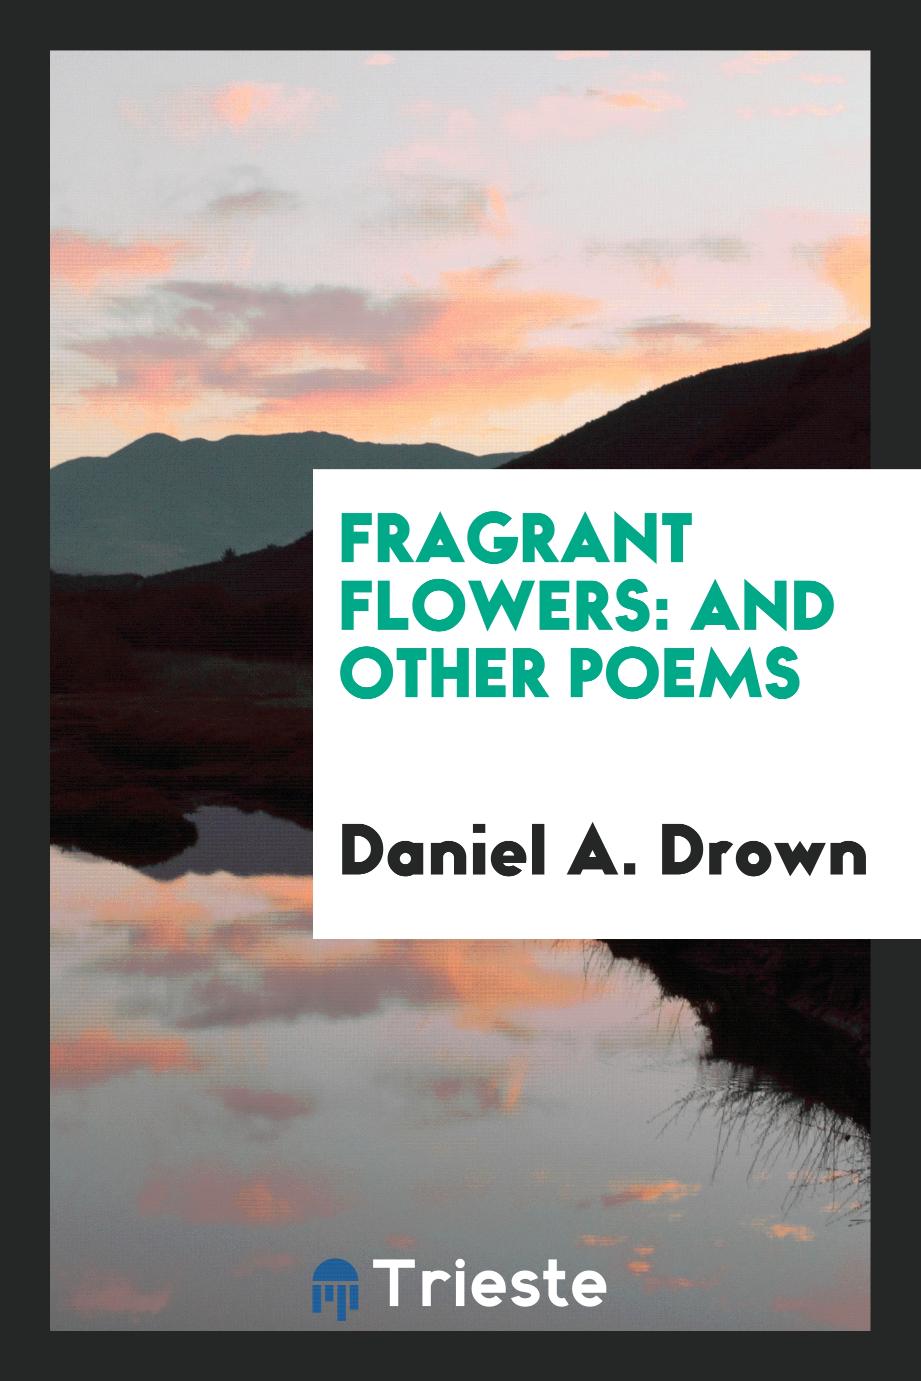 Fragrant flowers: and other poems